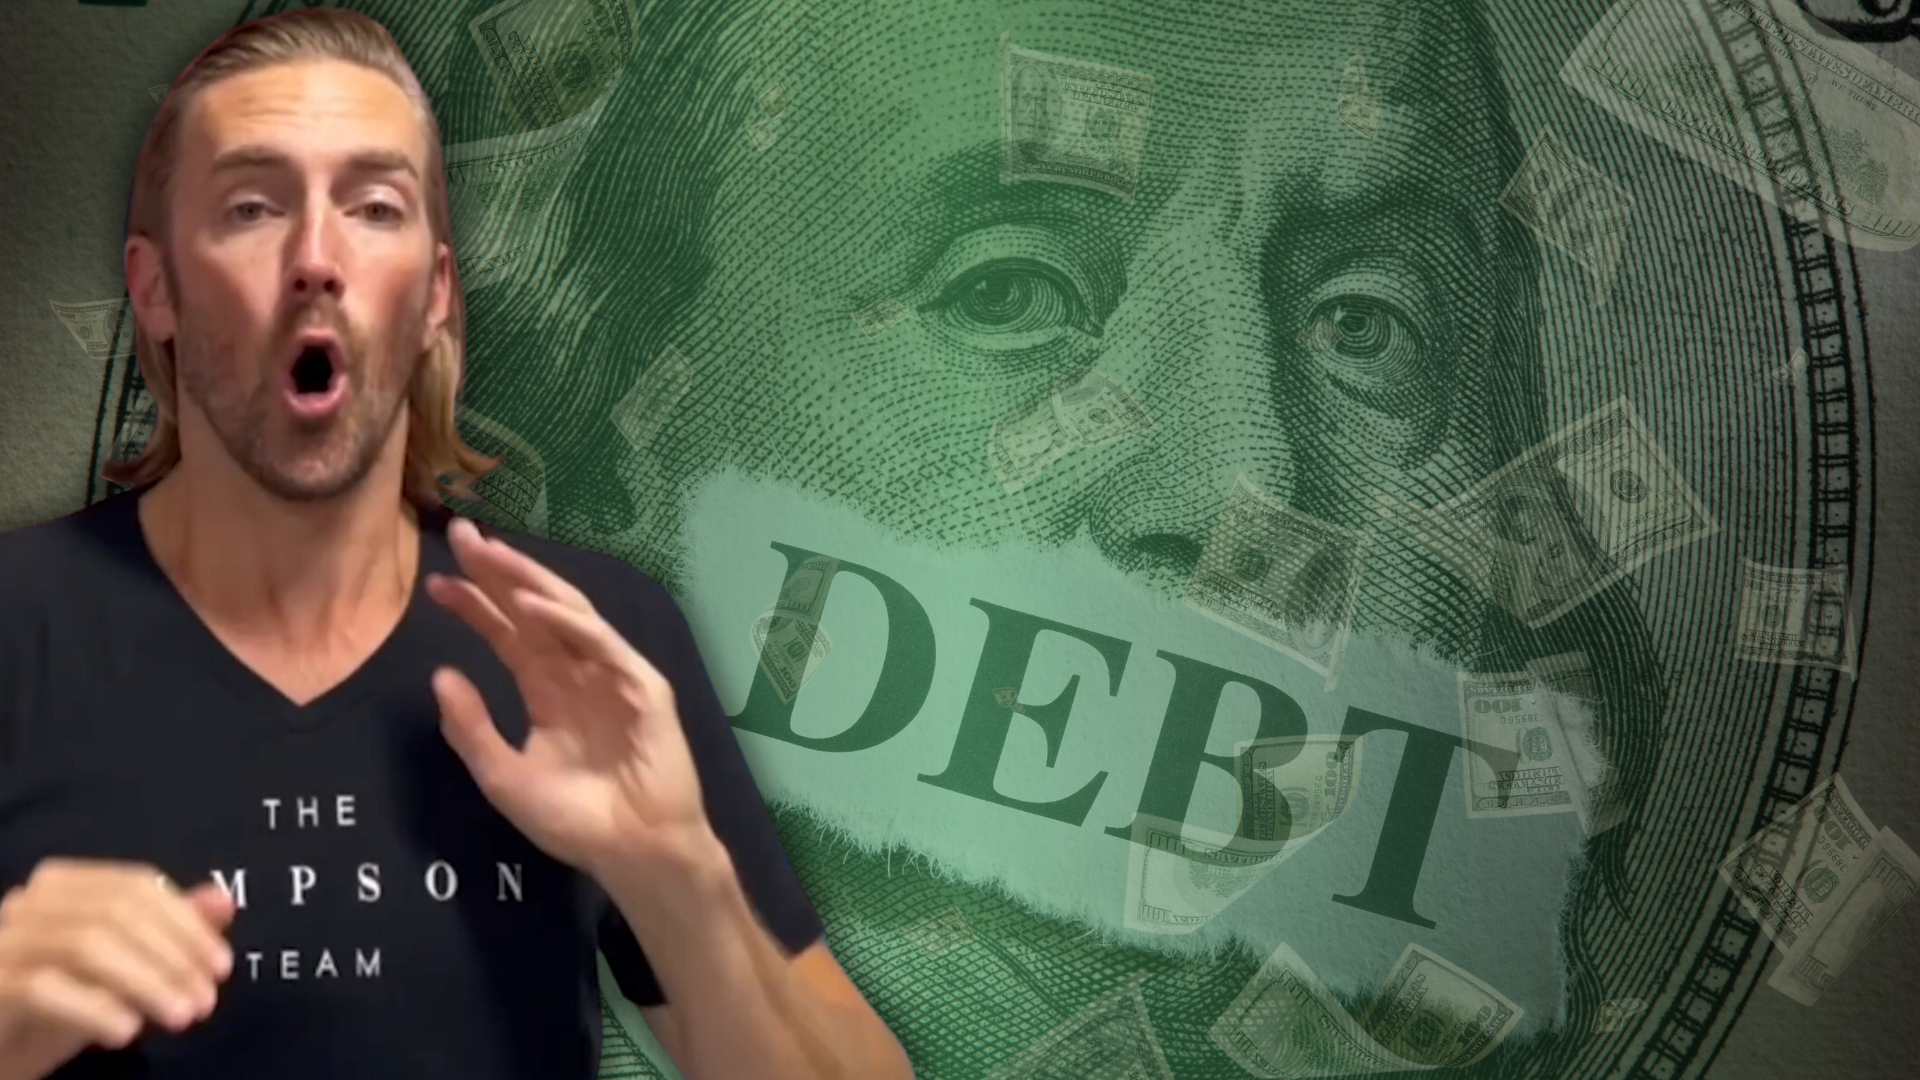 OMG! Household DEBT is at ALL time high of $17,000,000,000